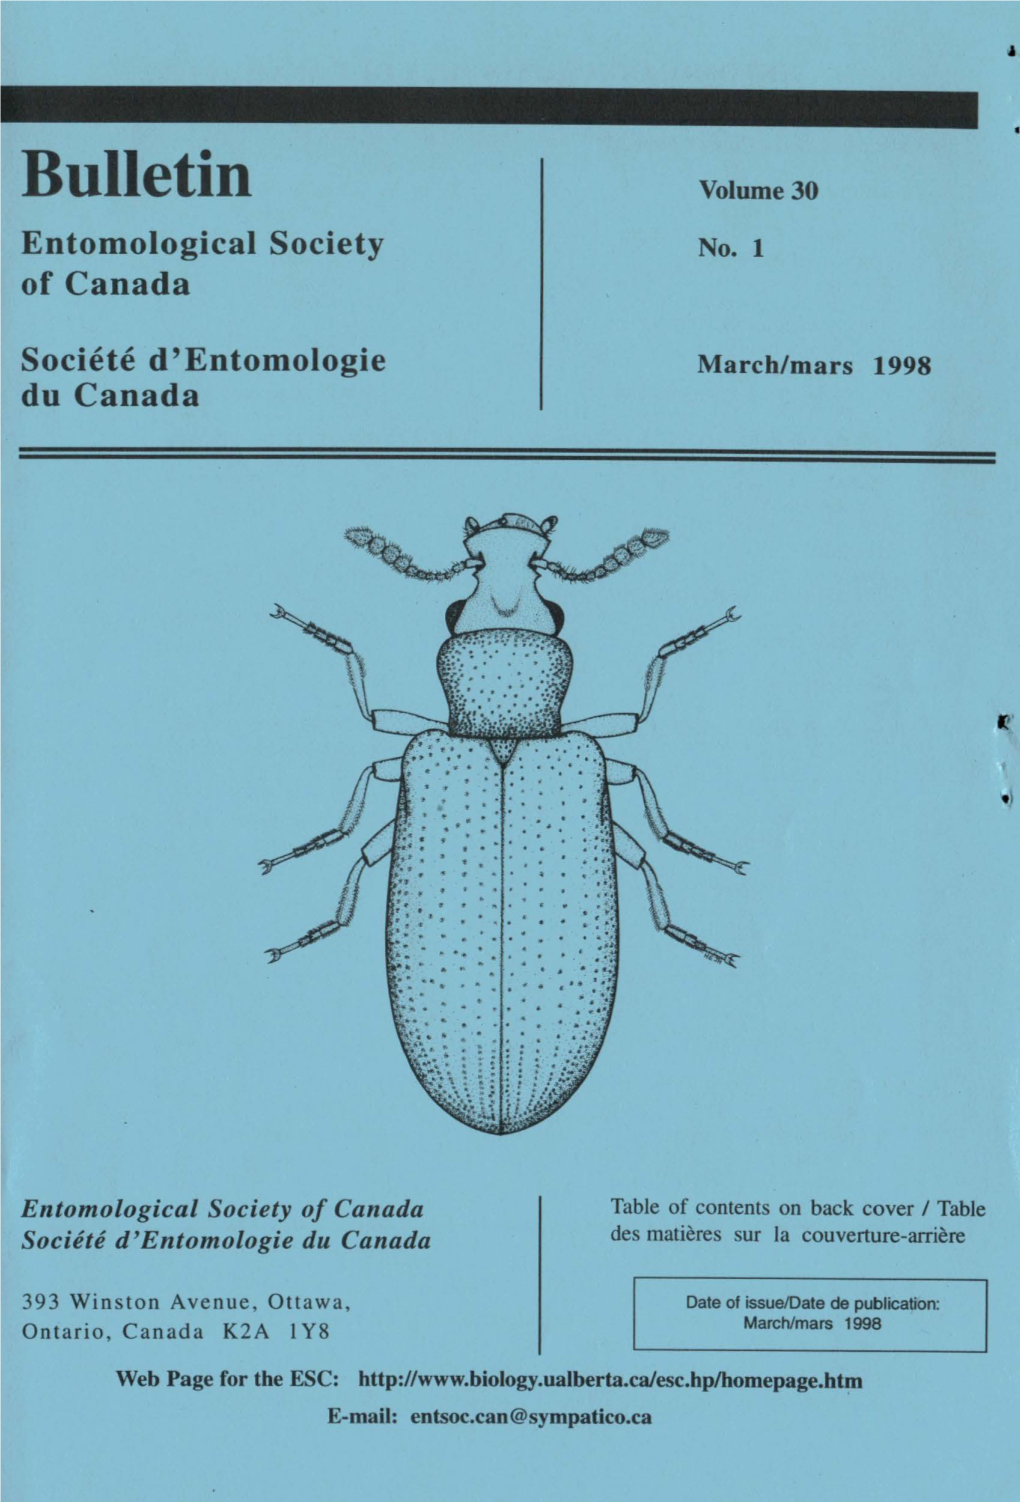 Bulletin of the Entomological Society of Canada, Illustrated on the Front Cover Is a Rhinosimus Viridiaeneus Randall